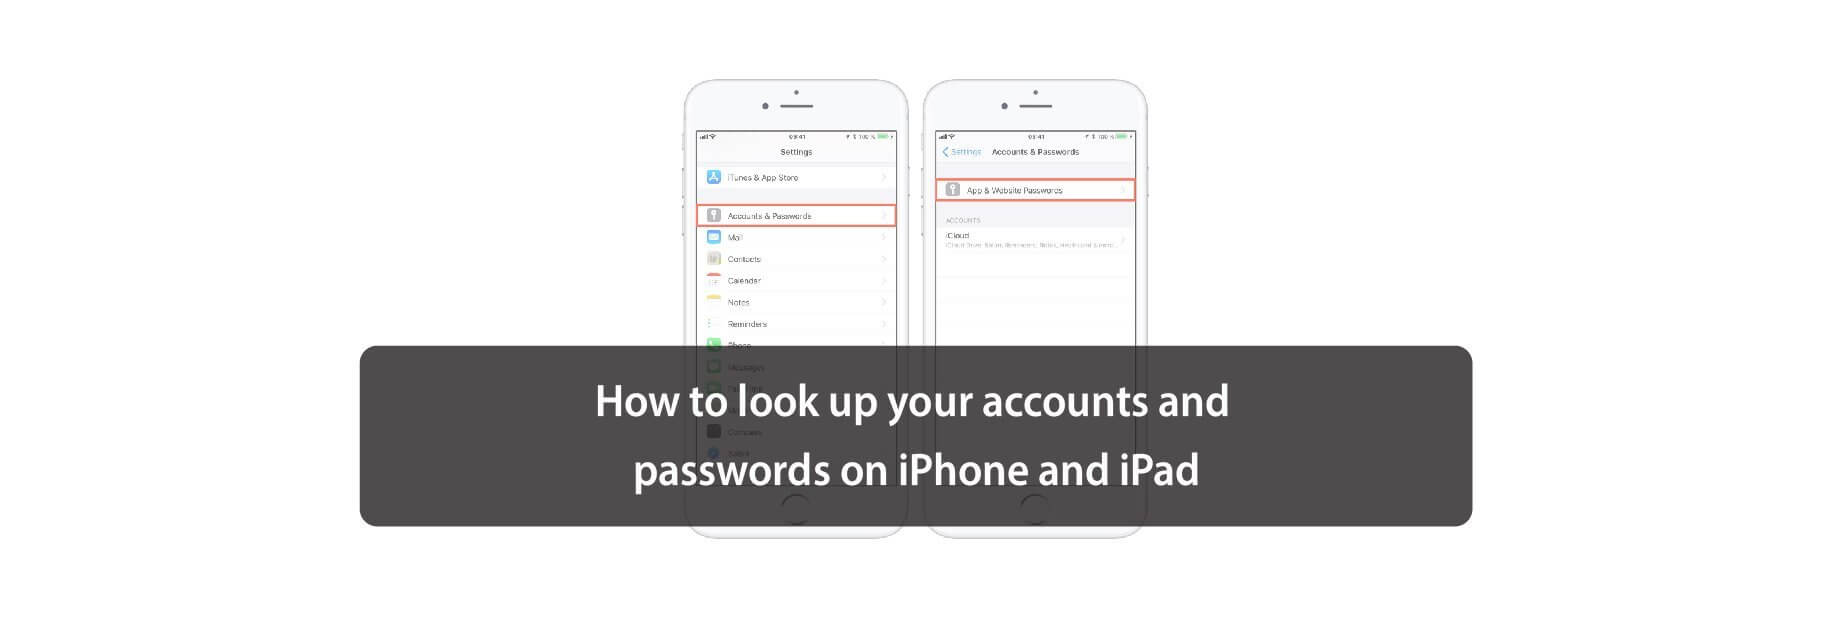 How to look up your accounts and passwords on iPhone and iPad